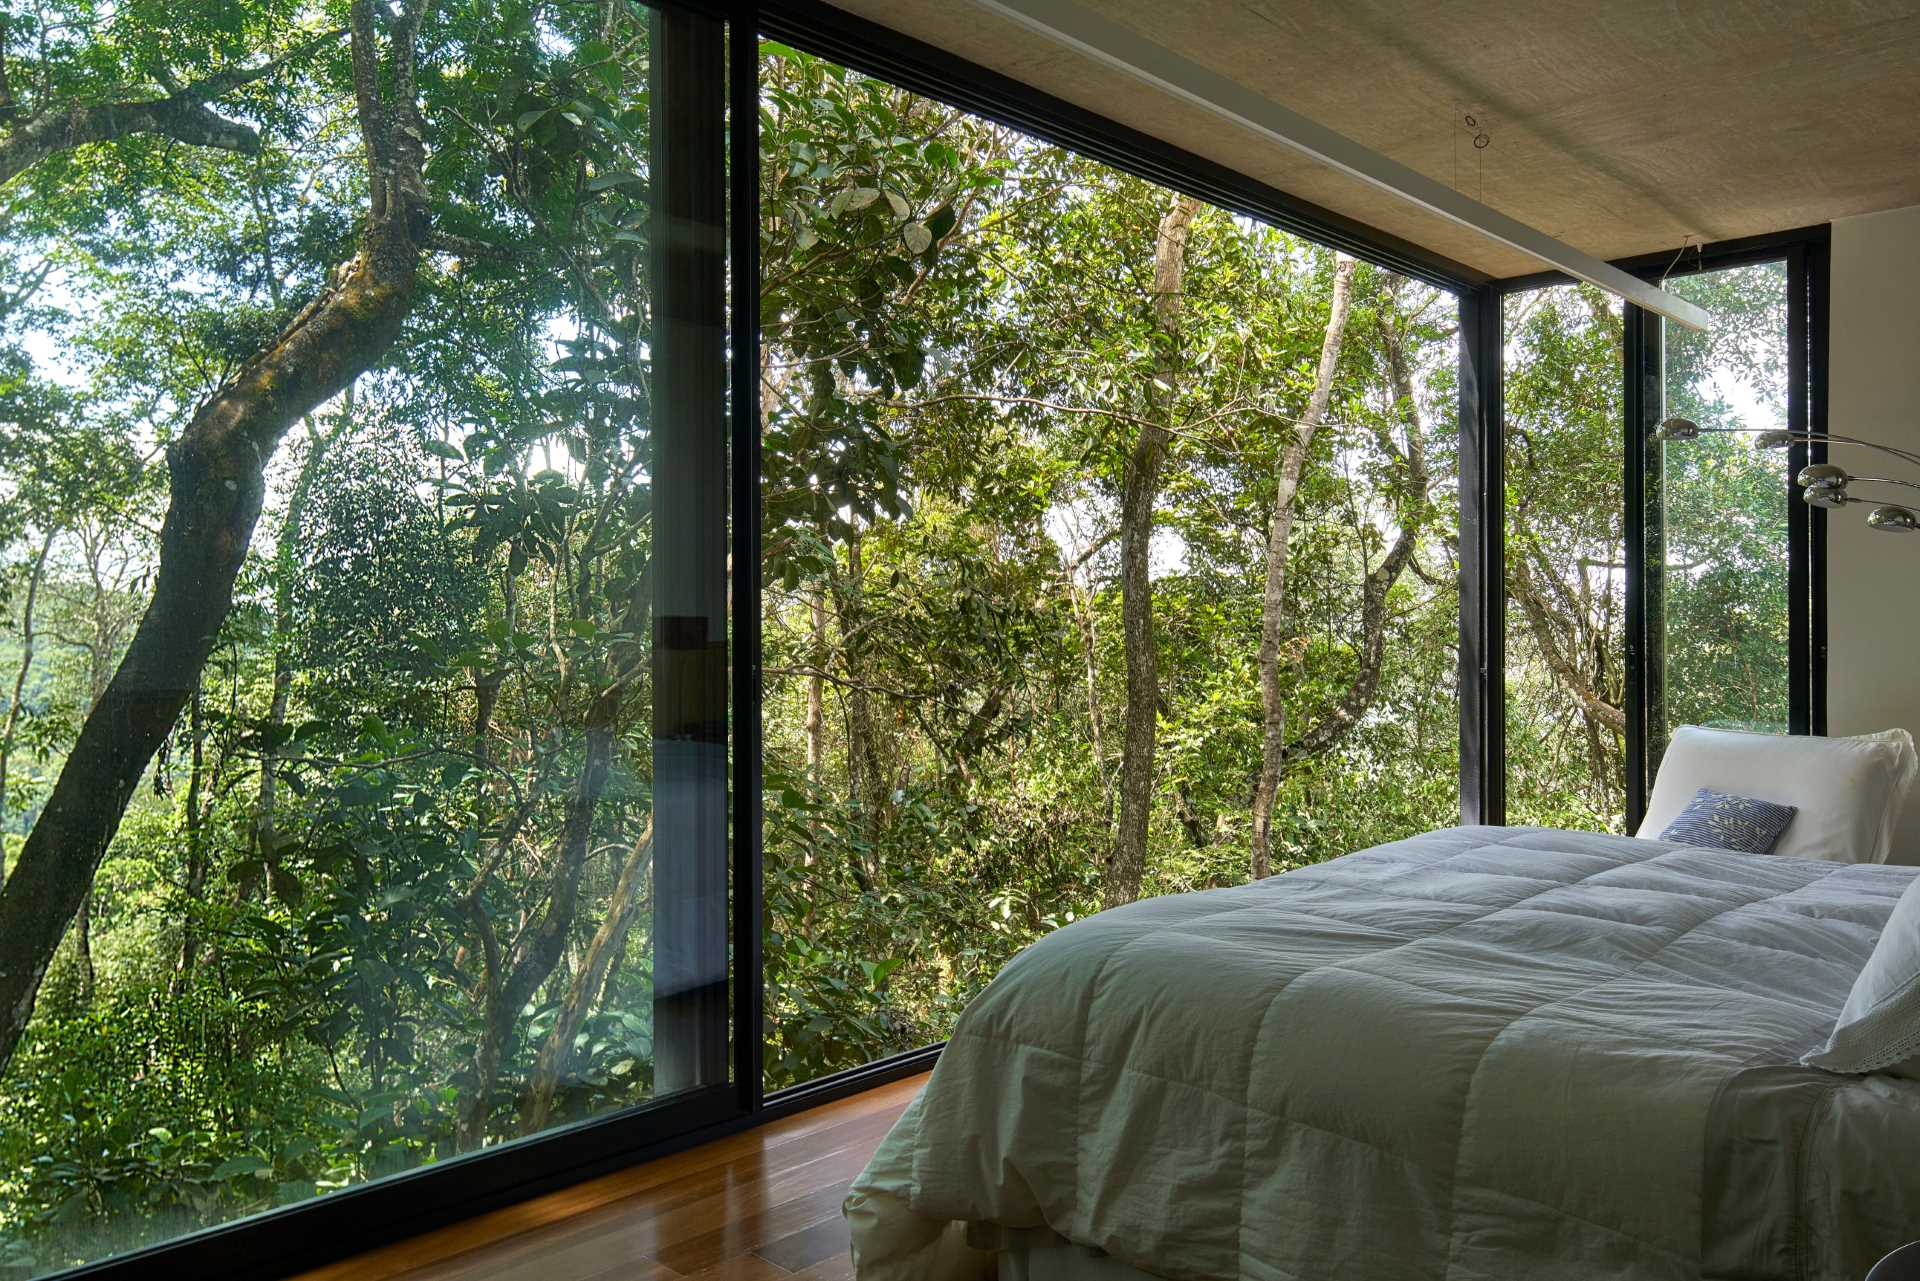 A modern bedroom with floor-to-ceiling windows.